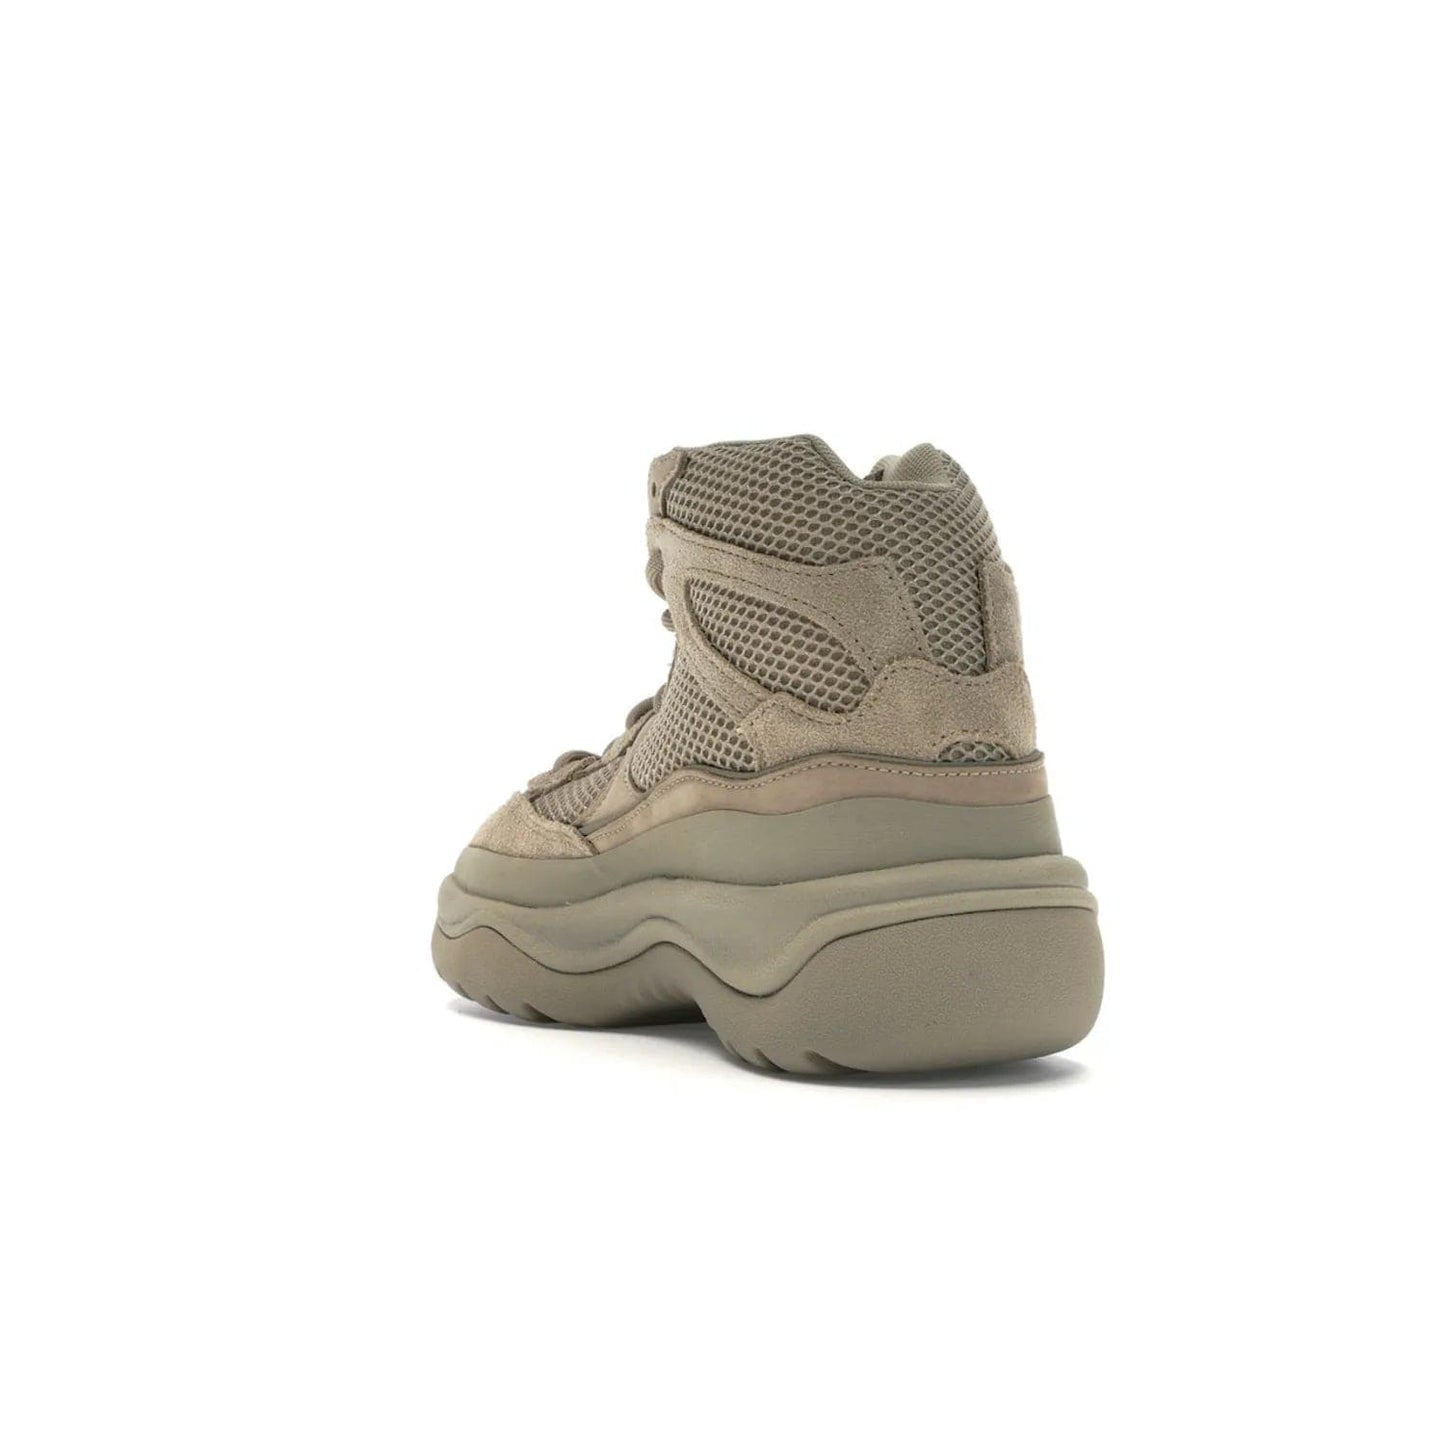 adidas Yeezy Desert Boot Rock - Image 25 - Only at www.BallersClubKickz.com - #
This season, make a fashion statement with the adidas Yeezy Desert Boot Rock. Nubuck and suede upper offers tonal style while the grooved sole provides traction and stability. Get yours in April 2019.